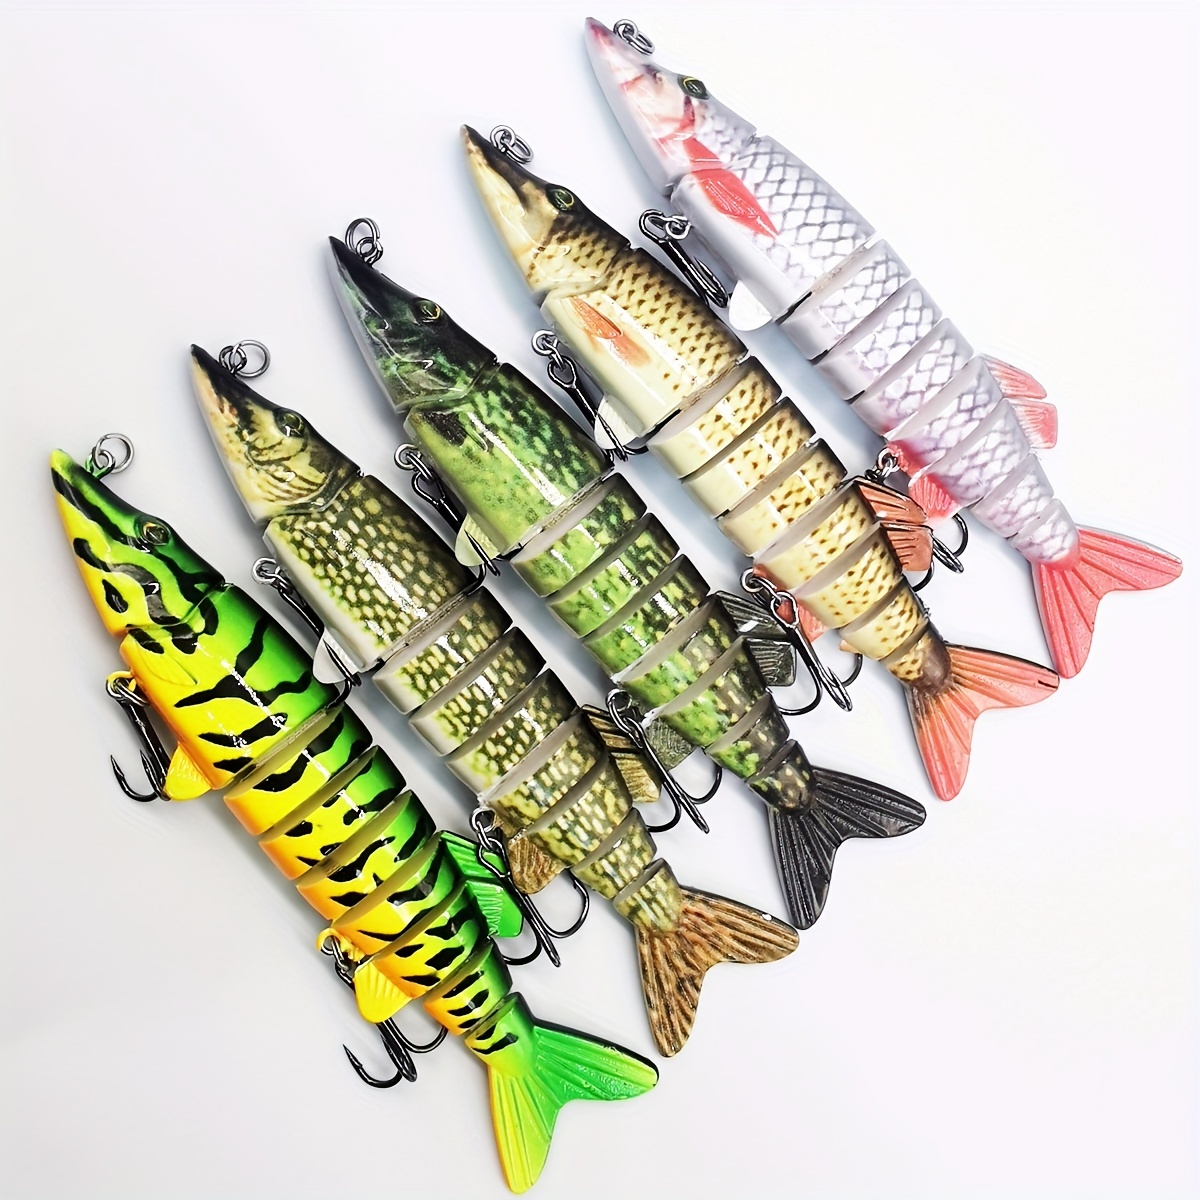 276 Pcs Fishing Lure Kit crankbaits deep dor Walleye and Pike Bionic Bass  Trout Salmon Pike RattleFor Trout Bass Salmon Mixed Hard Baits Soft Rubber